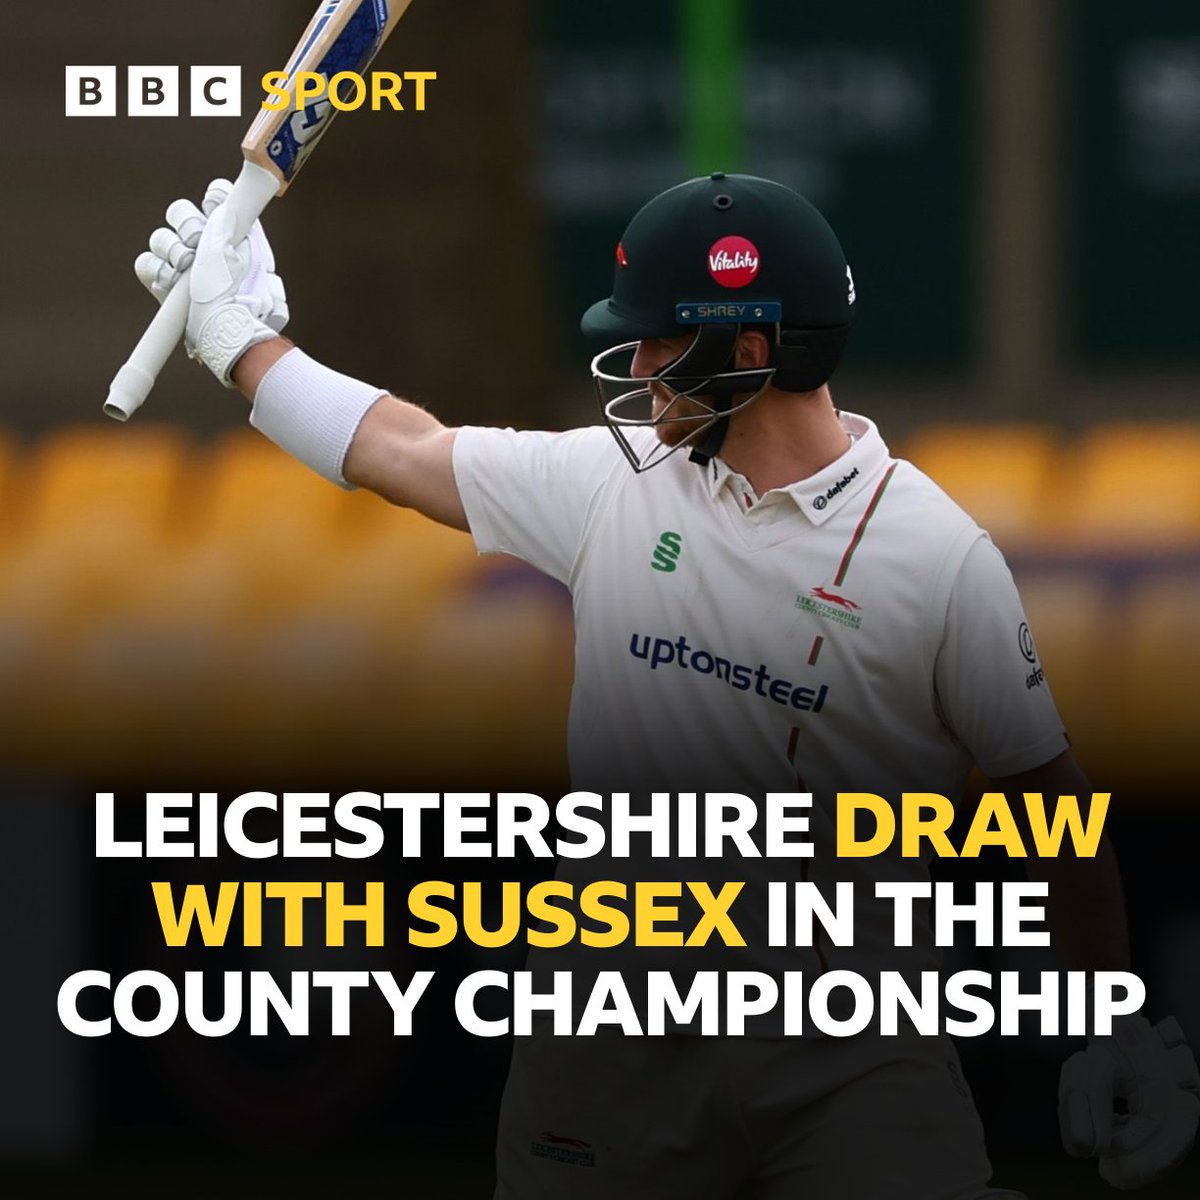 Leicestershire's second game of the County Championship season again ends in a draw 🦊🏏 They take 12 points from the game, with Liam Trevaskis getting his first Foxes wicket and scoring an impressive 82 with the bat in the first innings. They go to Derbyshire next on Friday.